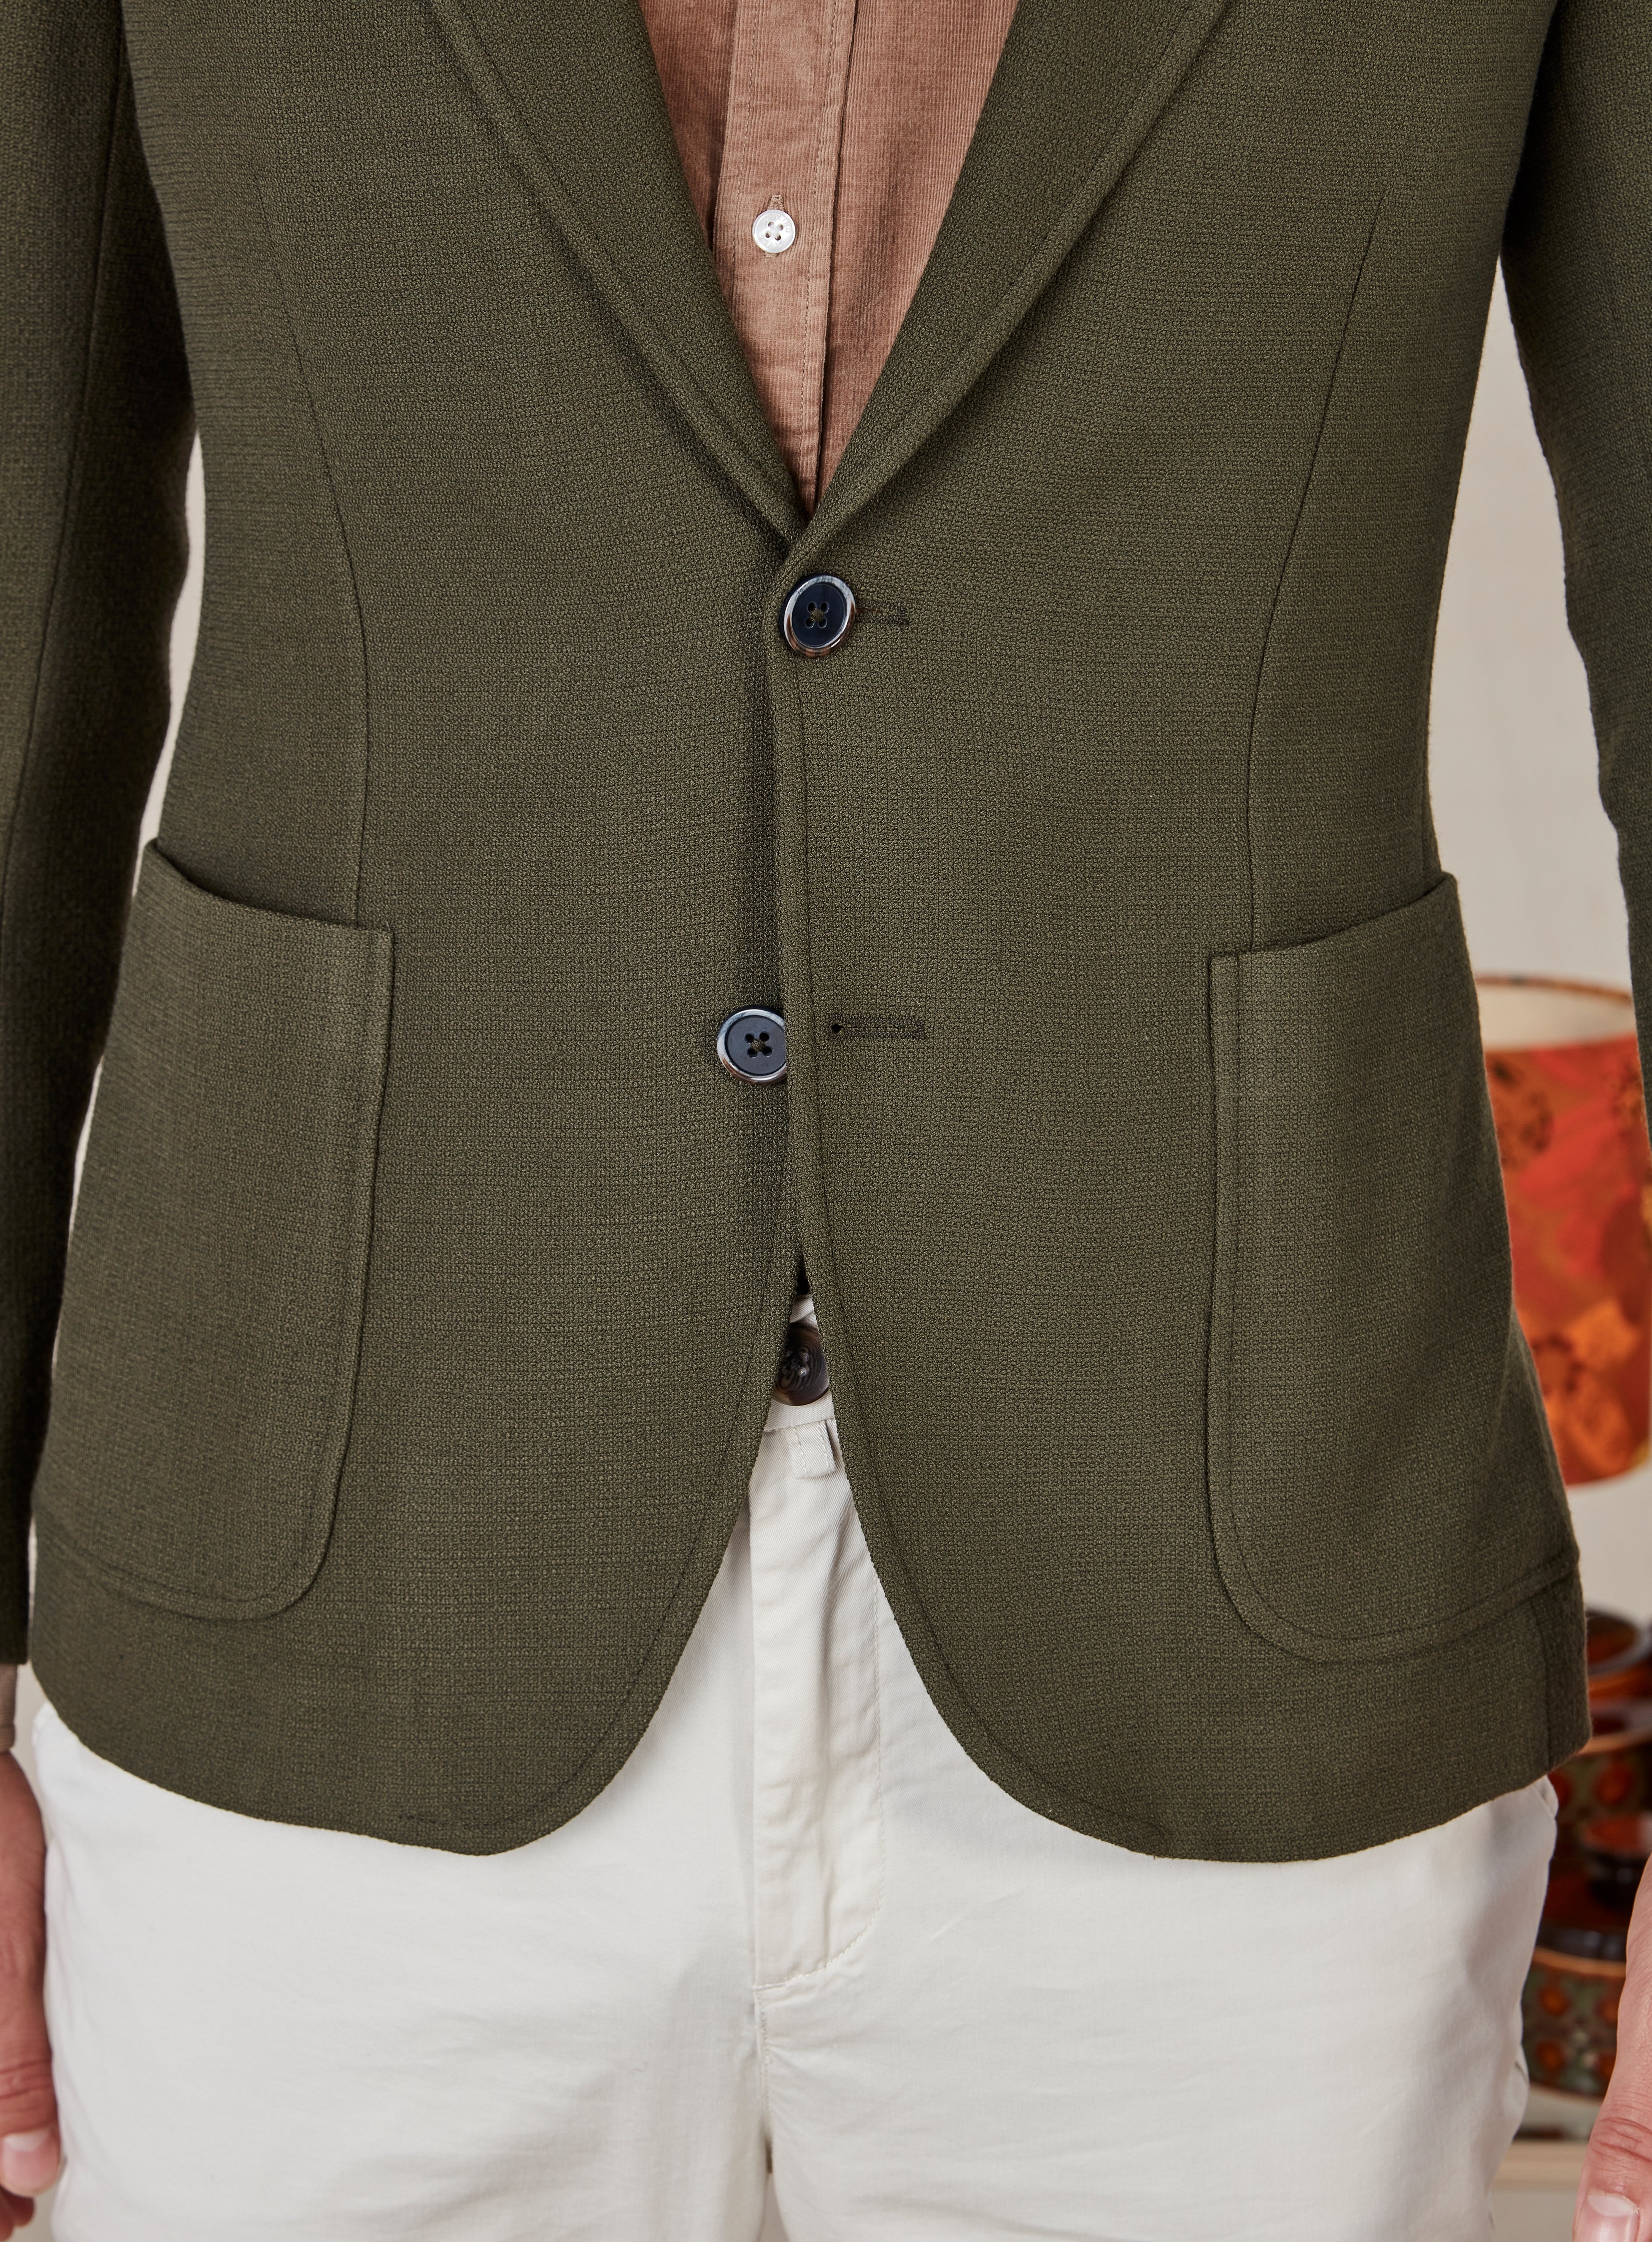 The Best Unstructured Blazers for Men This Fall - InsideHook